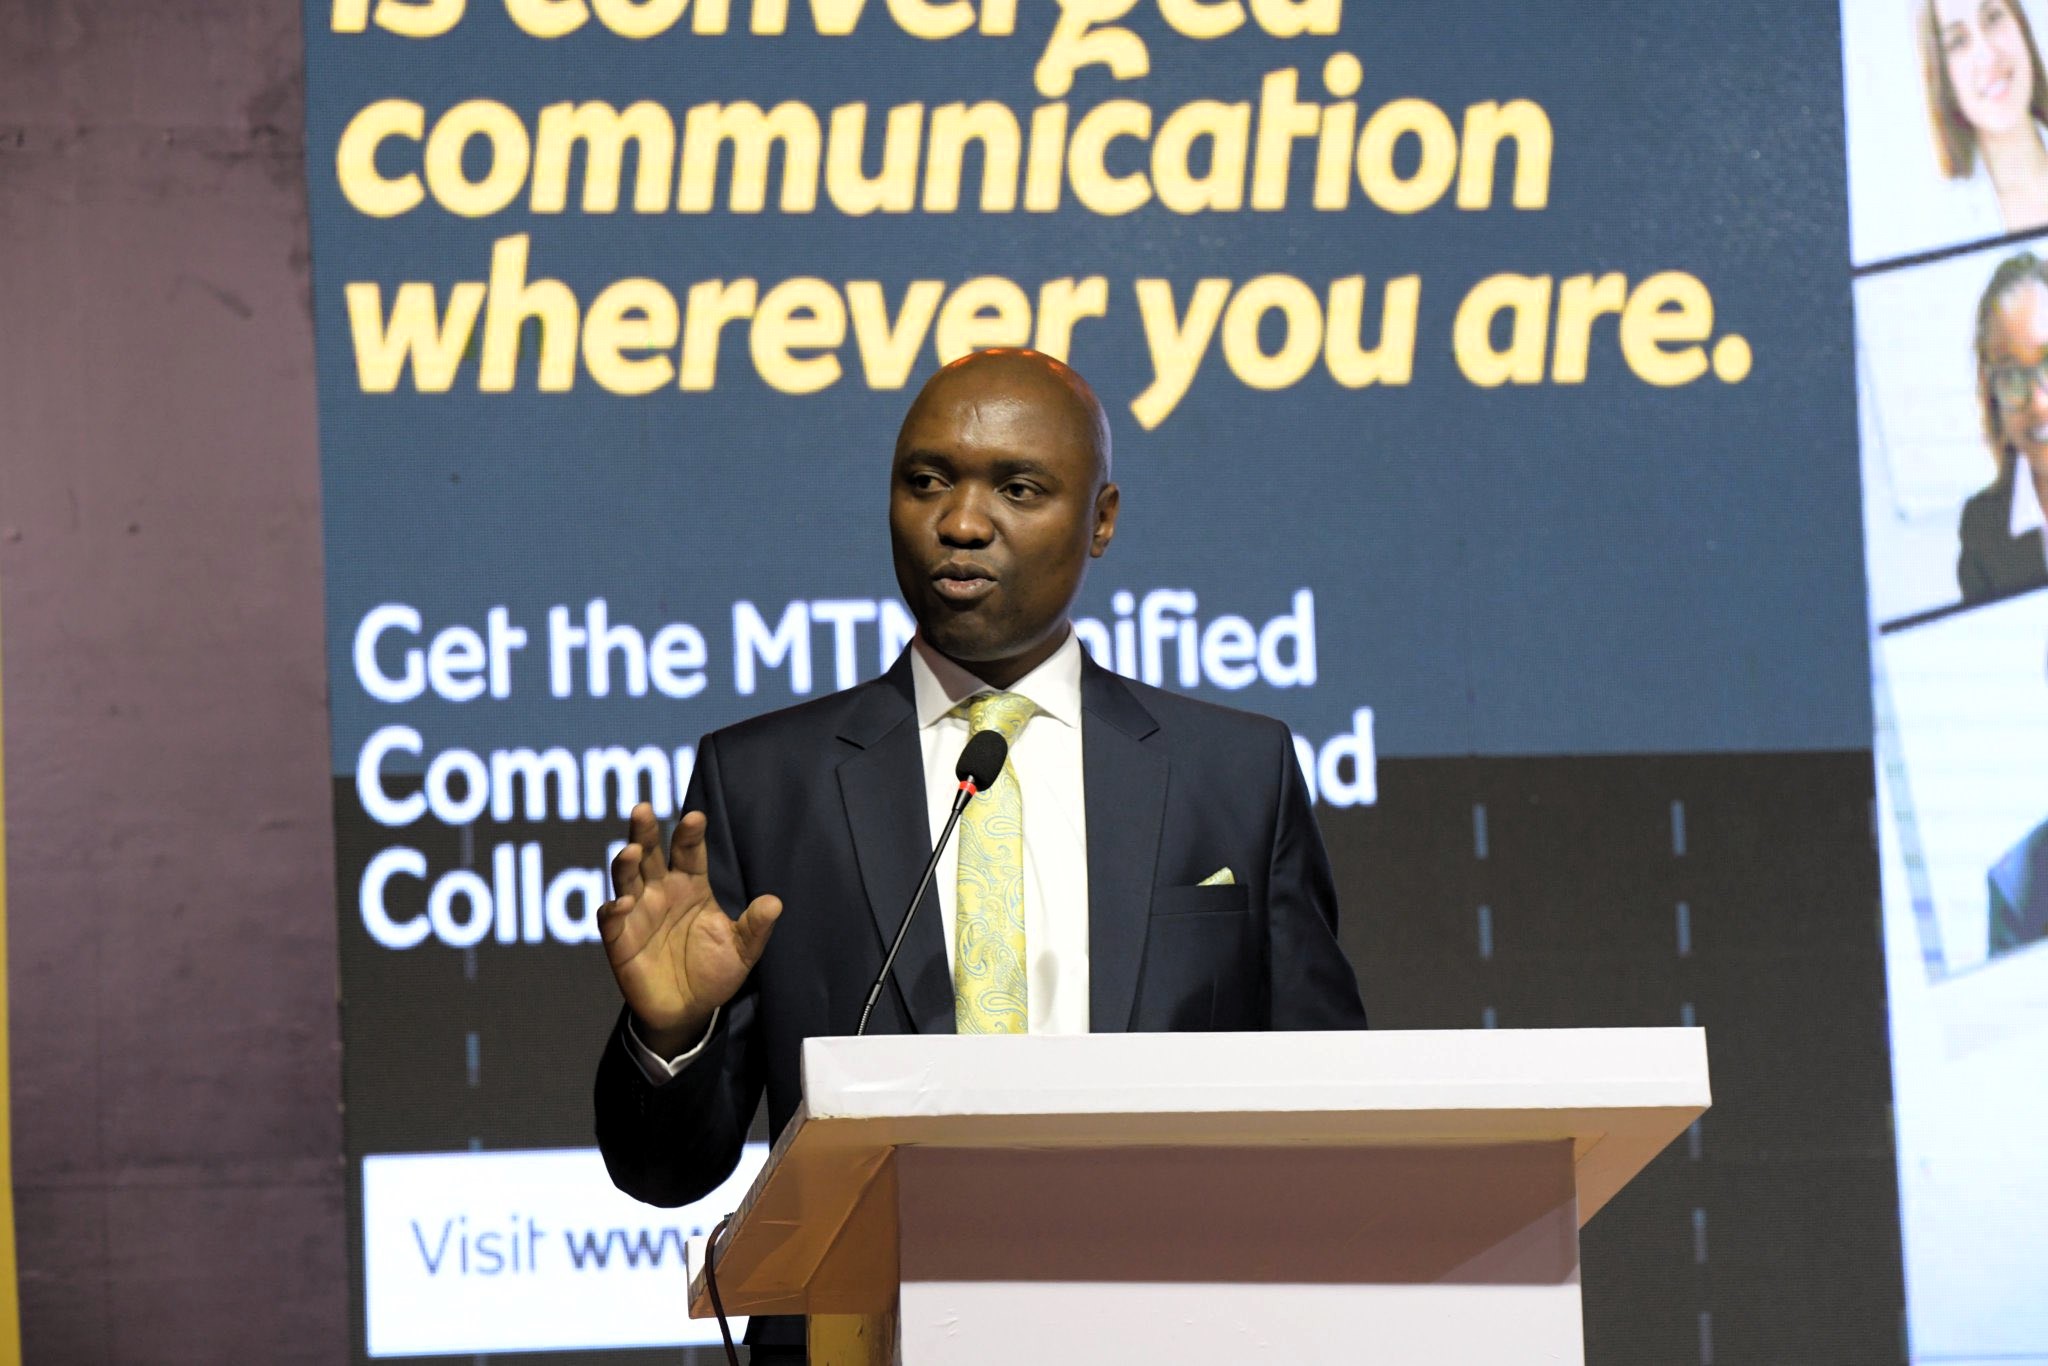 MTN Uganda Launches “Do Business Better with MTN ICT Solutions Campaign to Usher in a New Era of Business Transformation